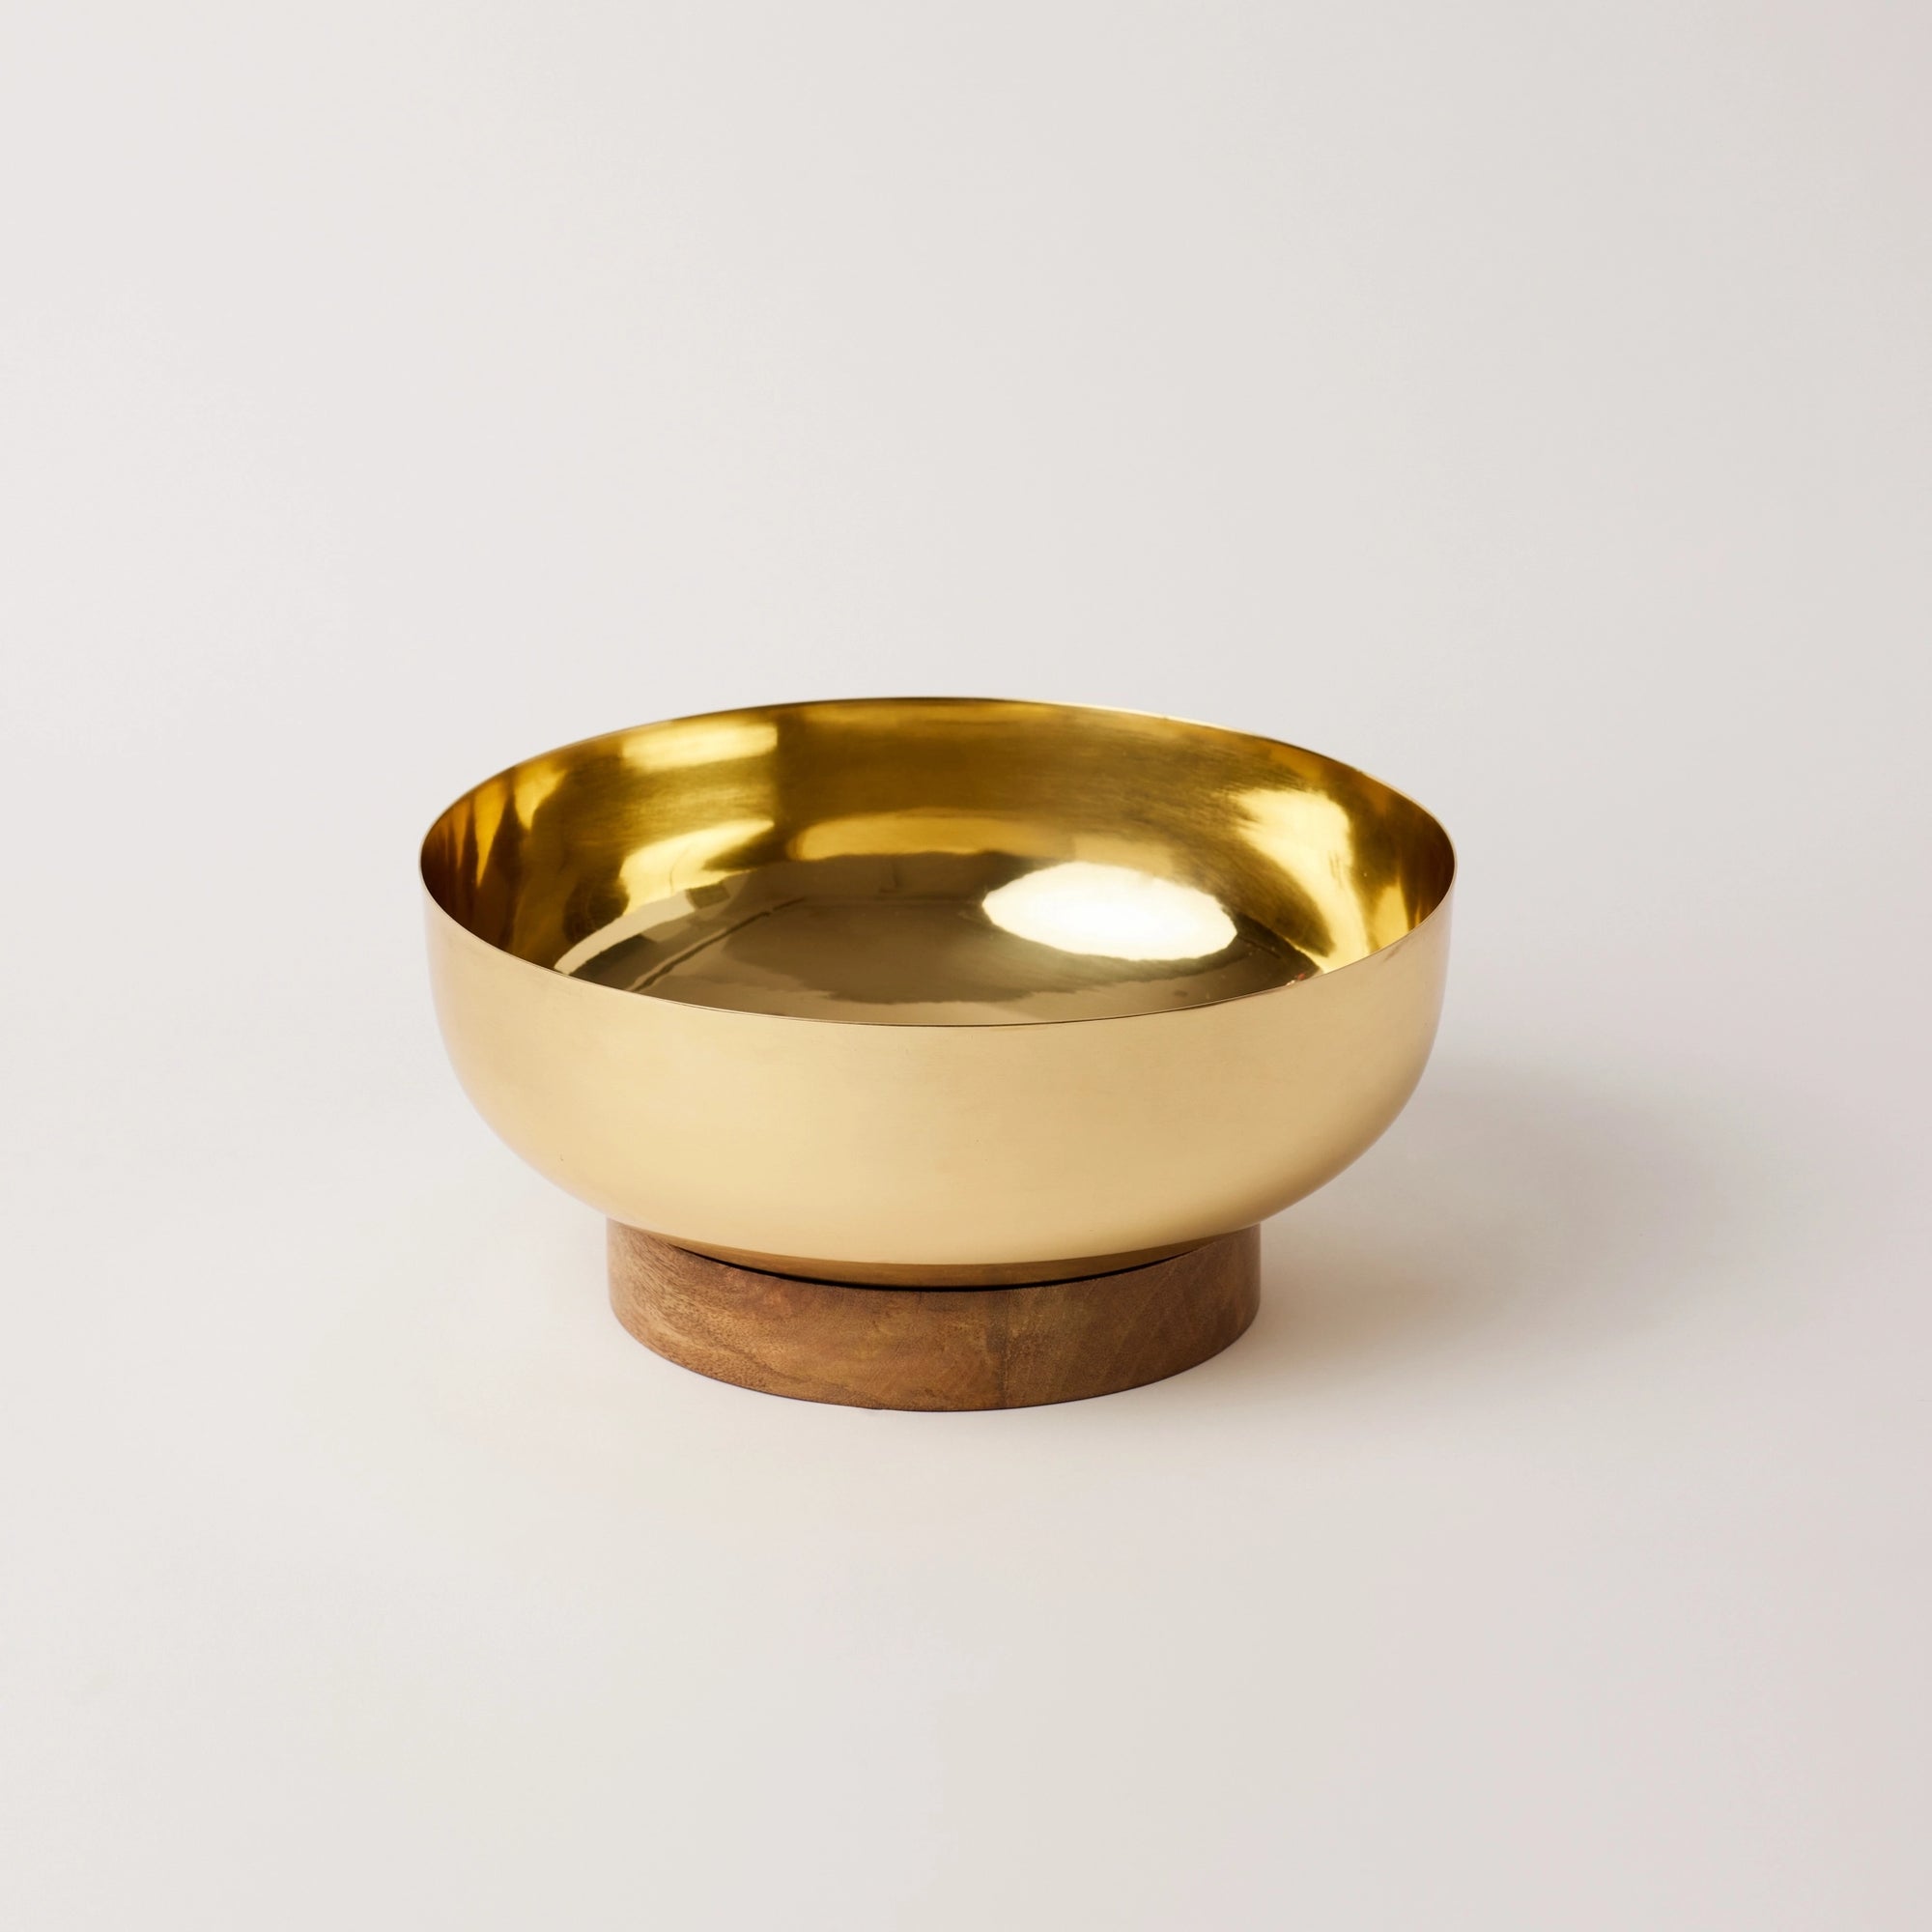 Brass and wood centerpiece bowl